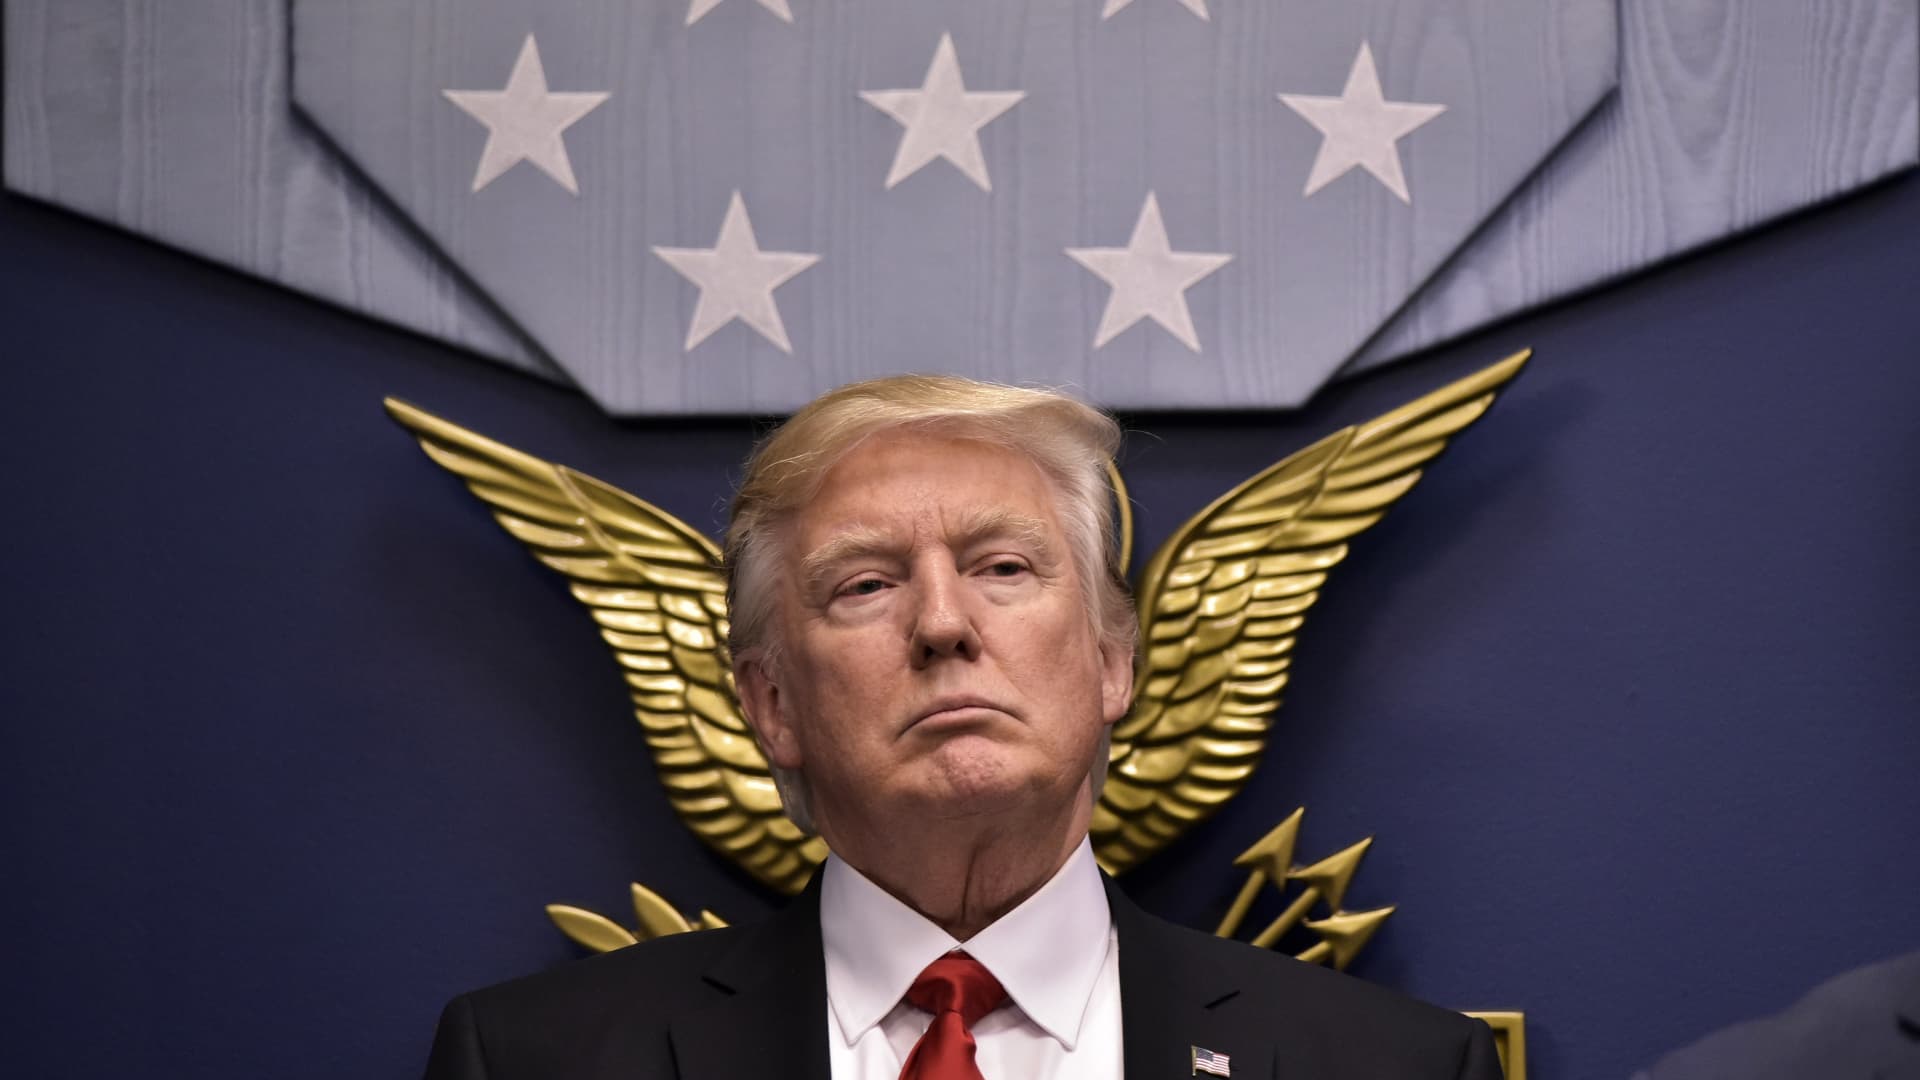 U.S. President Donald Trump speaks following the ceremonial swearing-in of James Mattis as secretary of defense on January 27, 2017, at the Pentagon in Washington, DC.